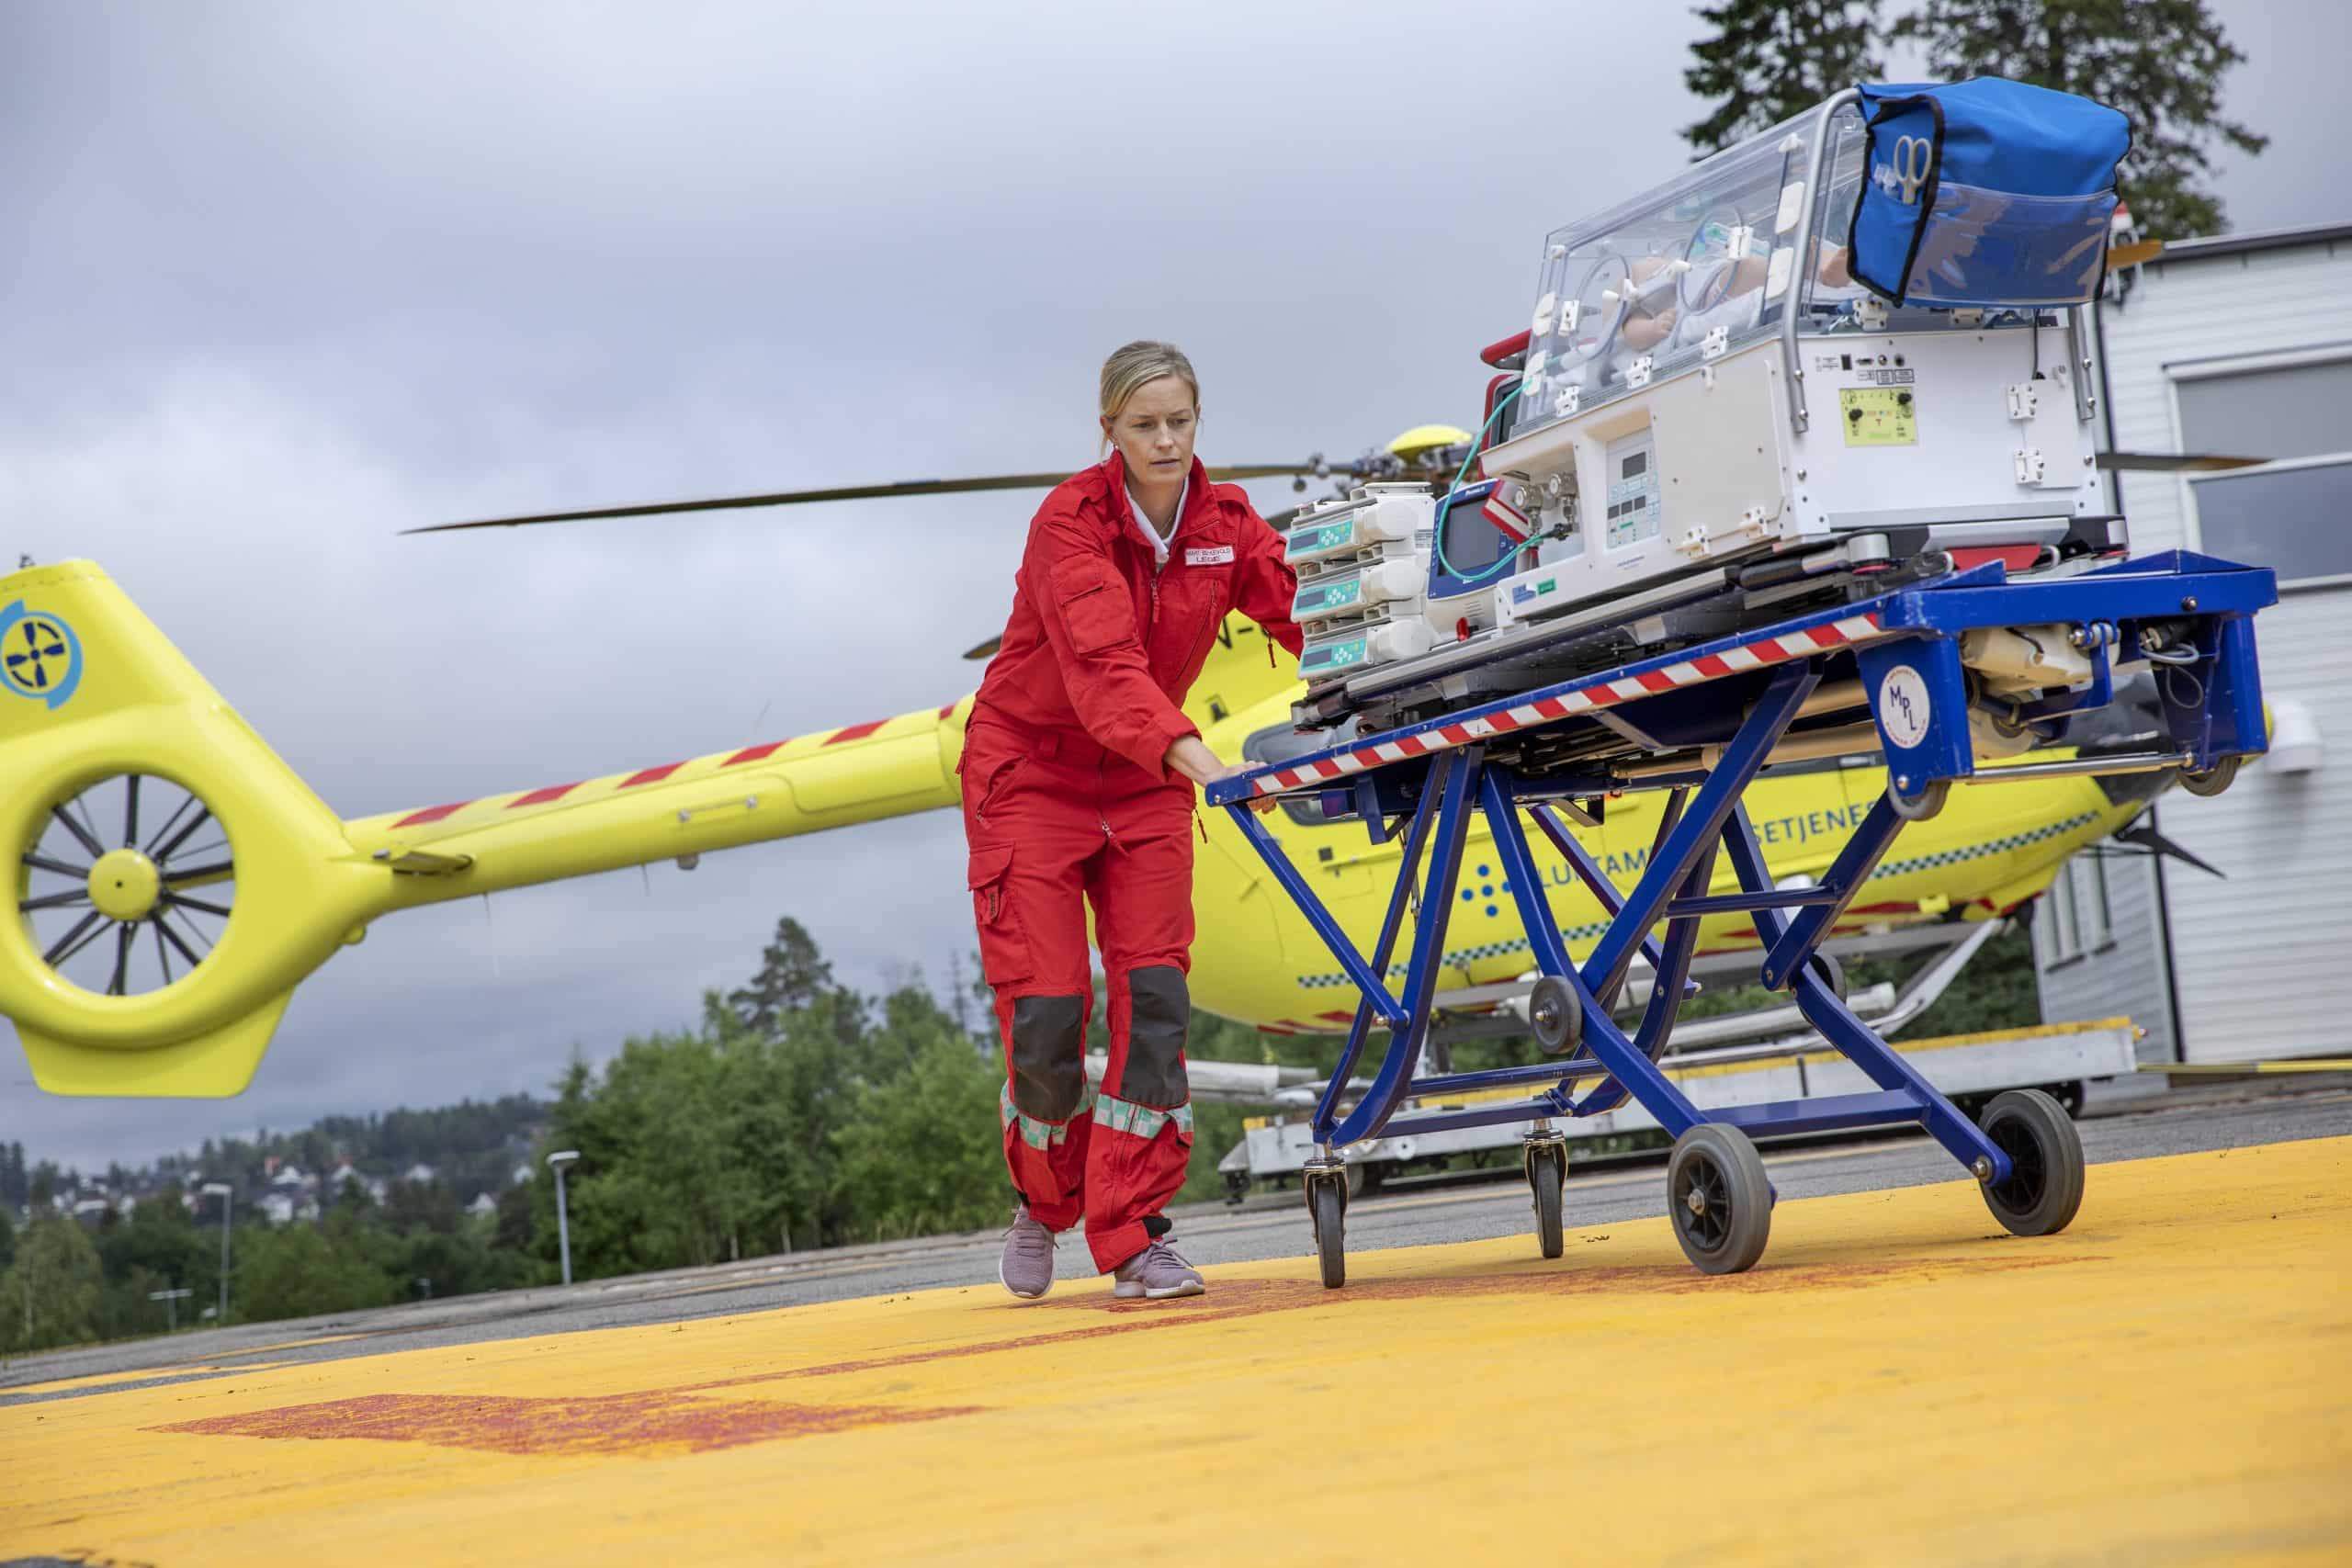 With 30 Ph.D. Candidates the Norwegian Air Ambulance Foundation is one of Europe’s largest professional communities in emergency medicine outside hospitals.